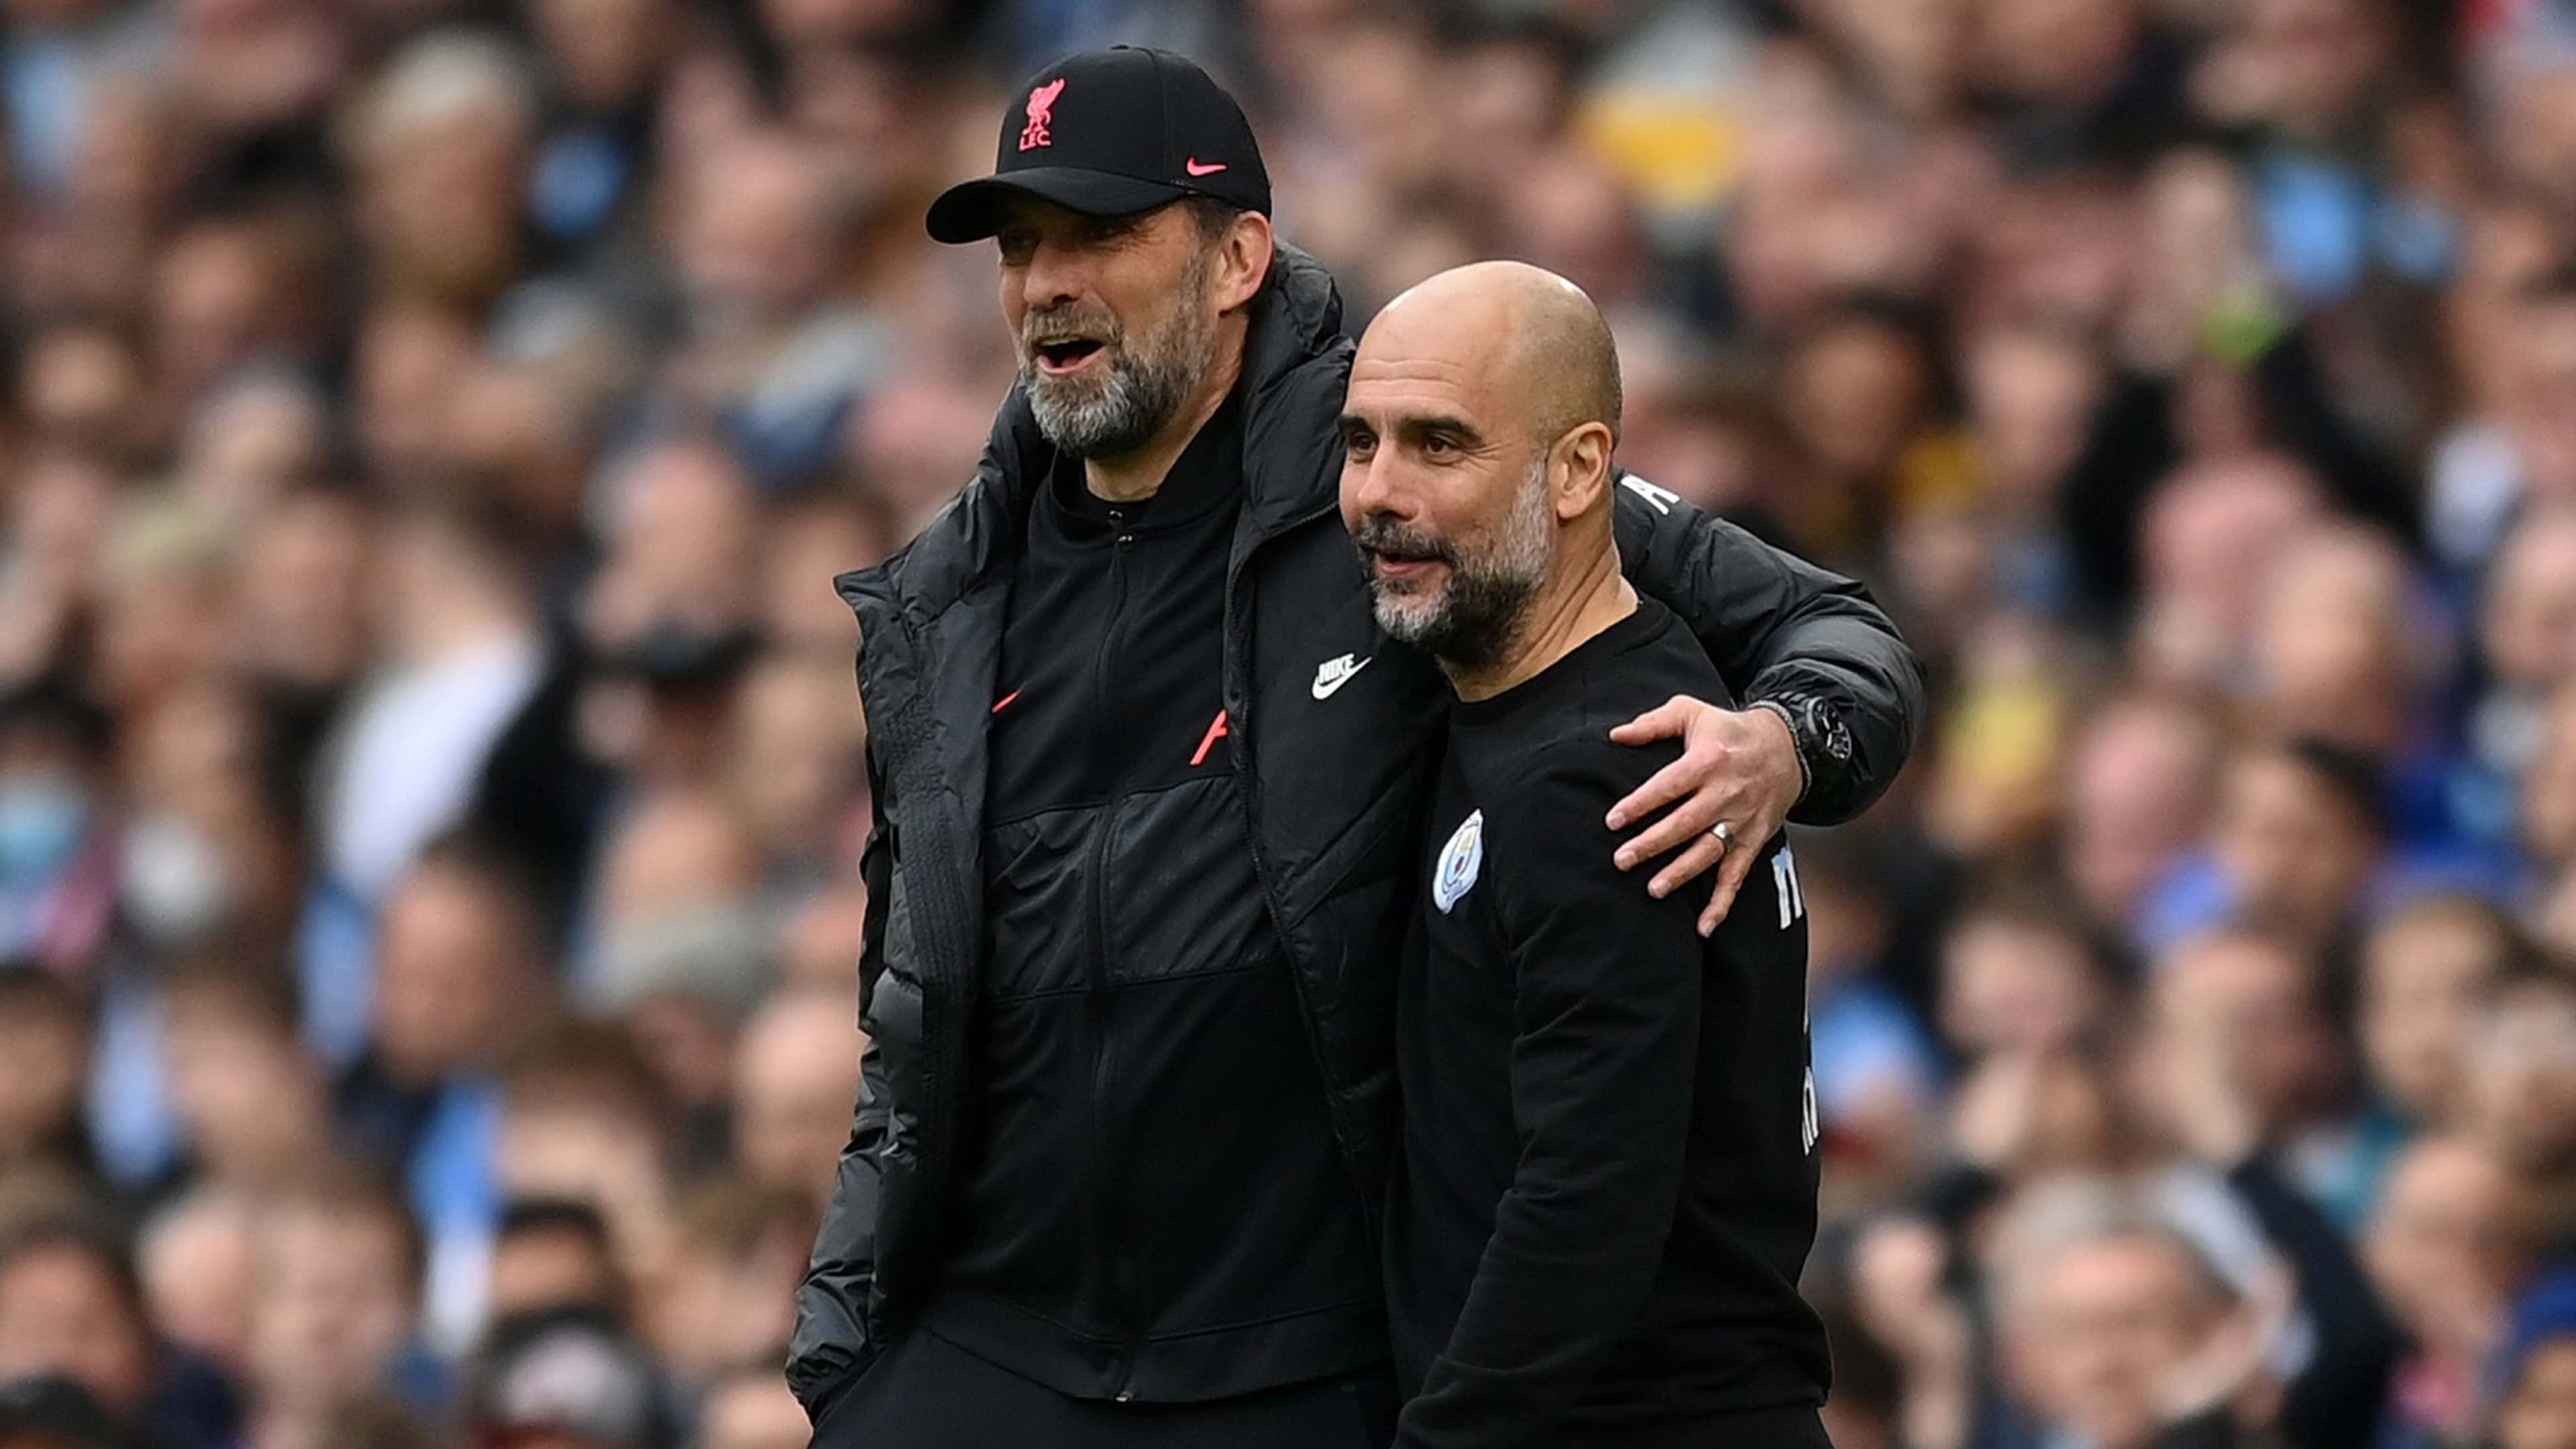 Man City manager Pep Guardiola says Liverpool are favourites to win the league title.